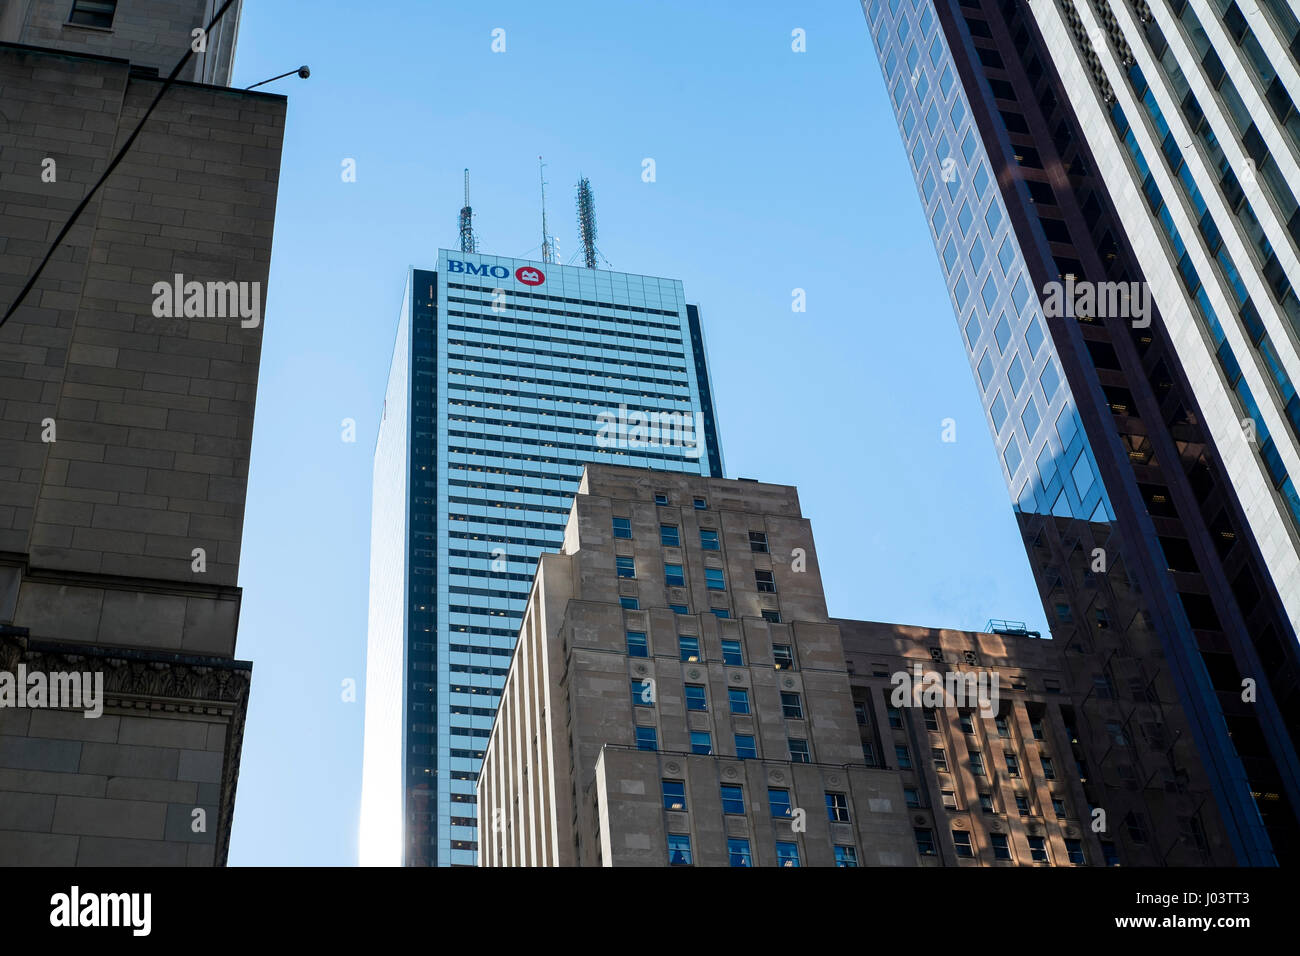 The Bank of Montreal (BMO) building in the Toronto Financial District, Ontario, Canada Stock Photo